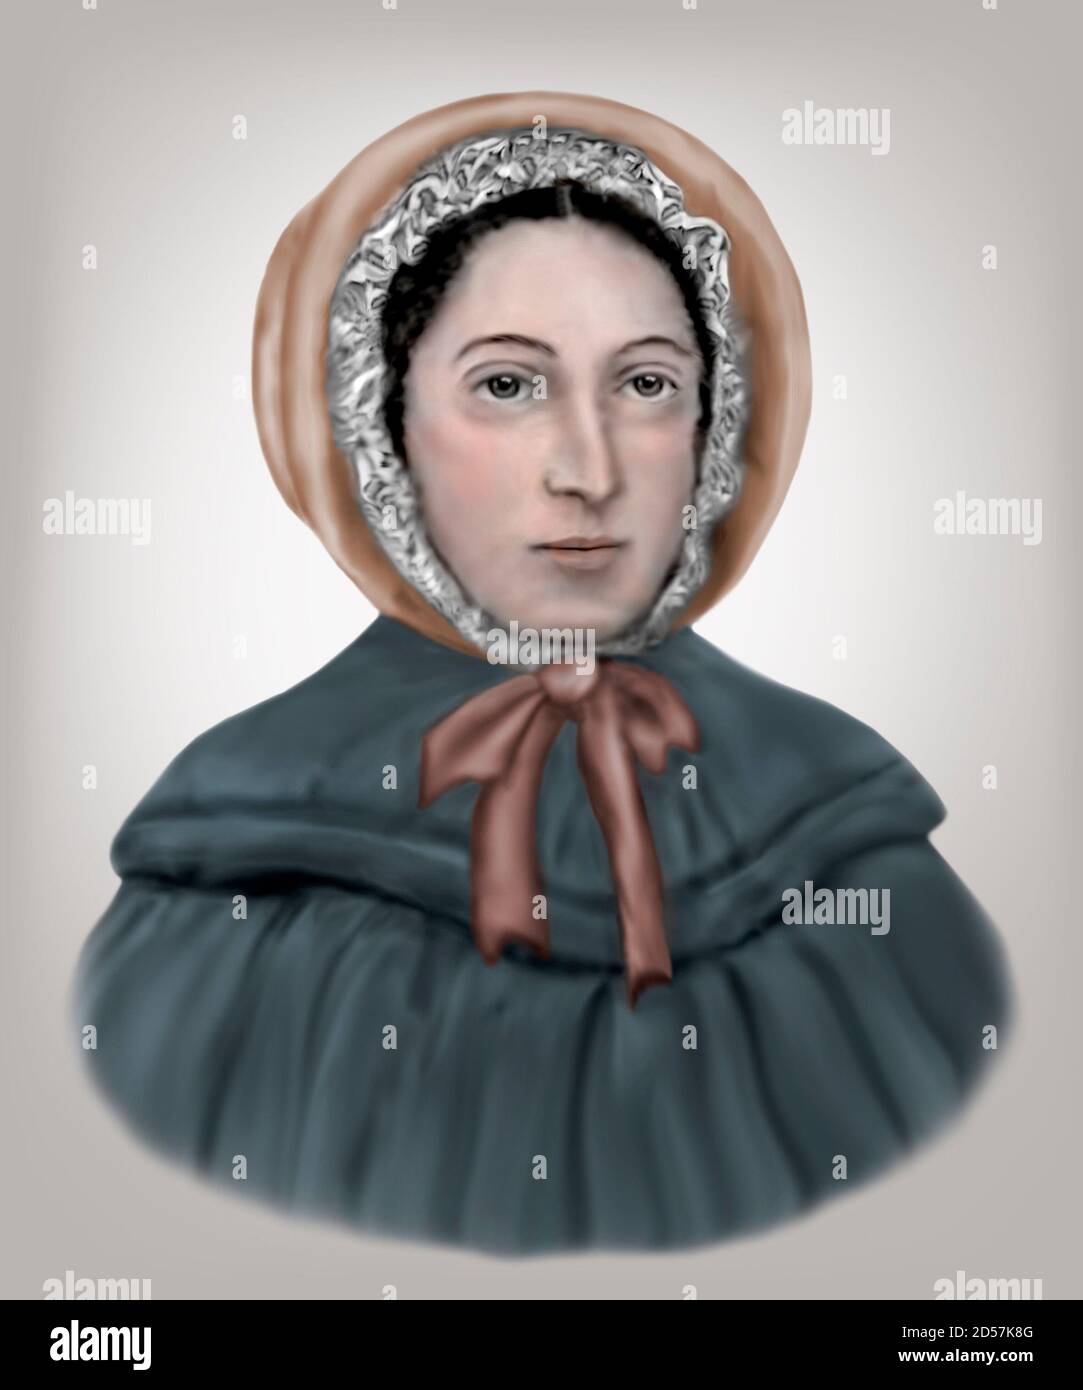 Mary Anning 1799-1847 inglese fossile paleontologo collettore Foto Stock